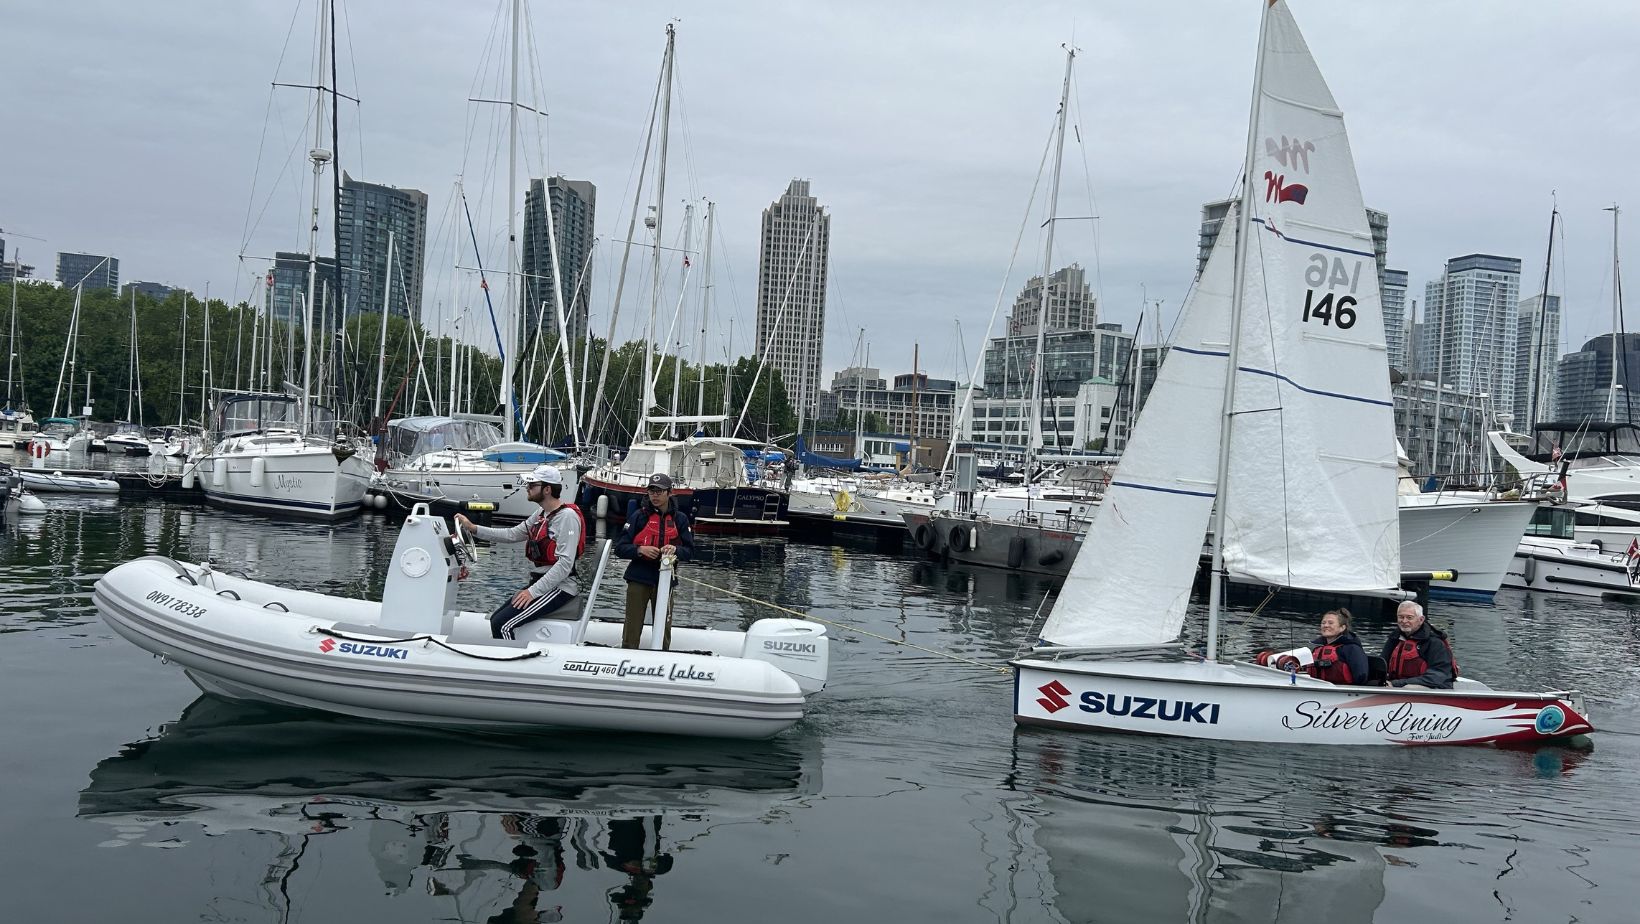 Suzuki Canada To Support Able Sail Toronto & Mobility Cup Events Through 2026!